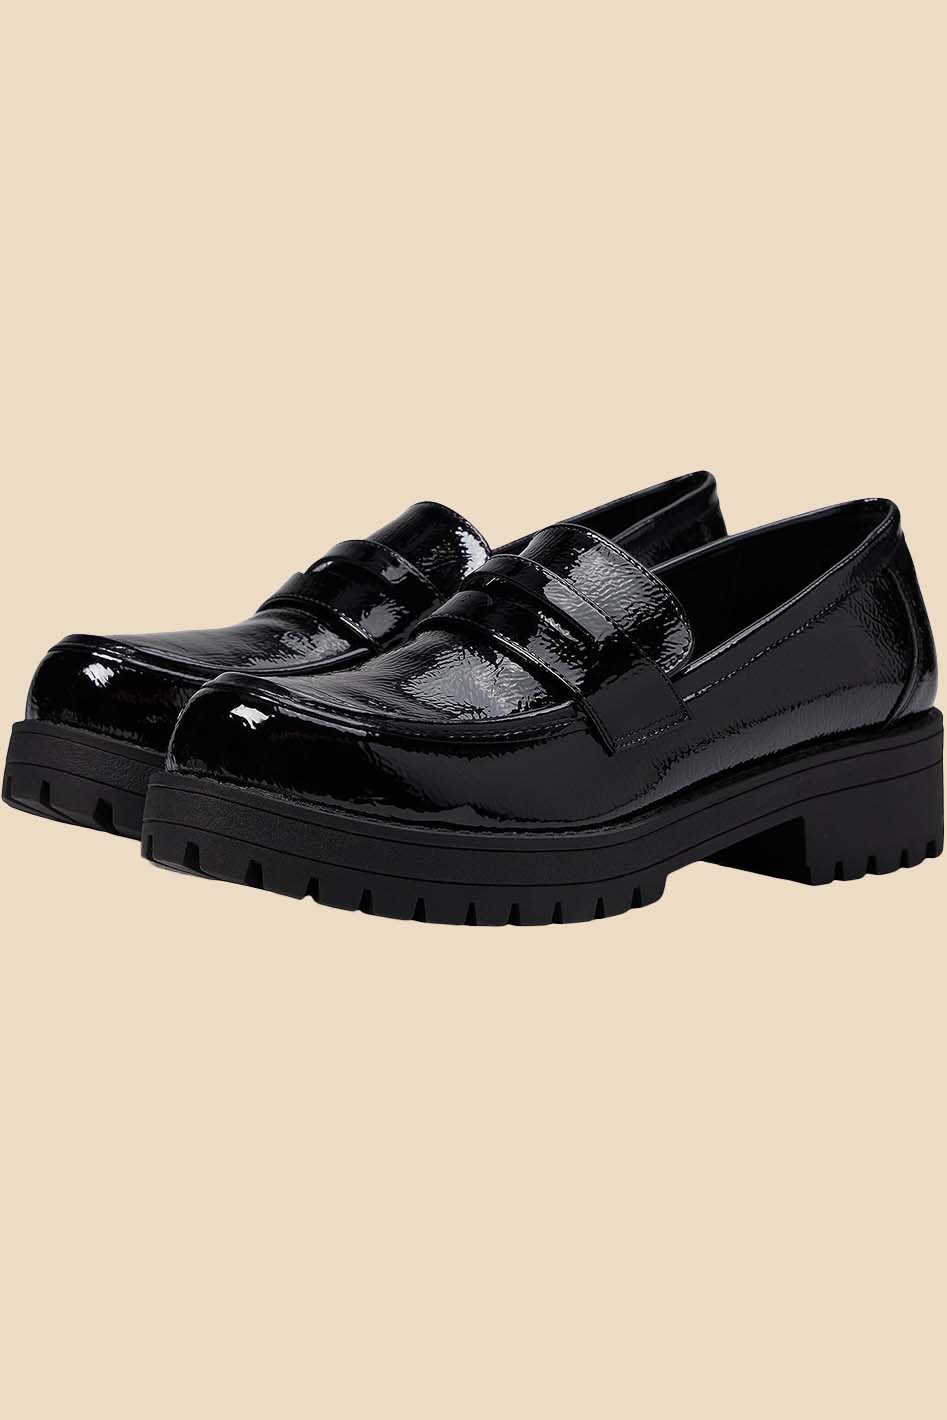 Chinese Laundry Voidz Black Chunky Loafers (Sz.7)